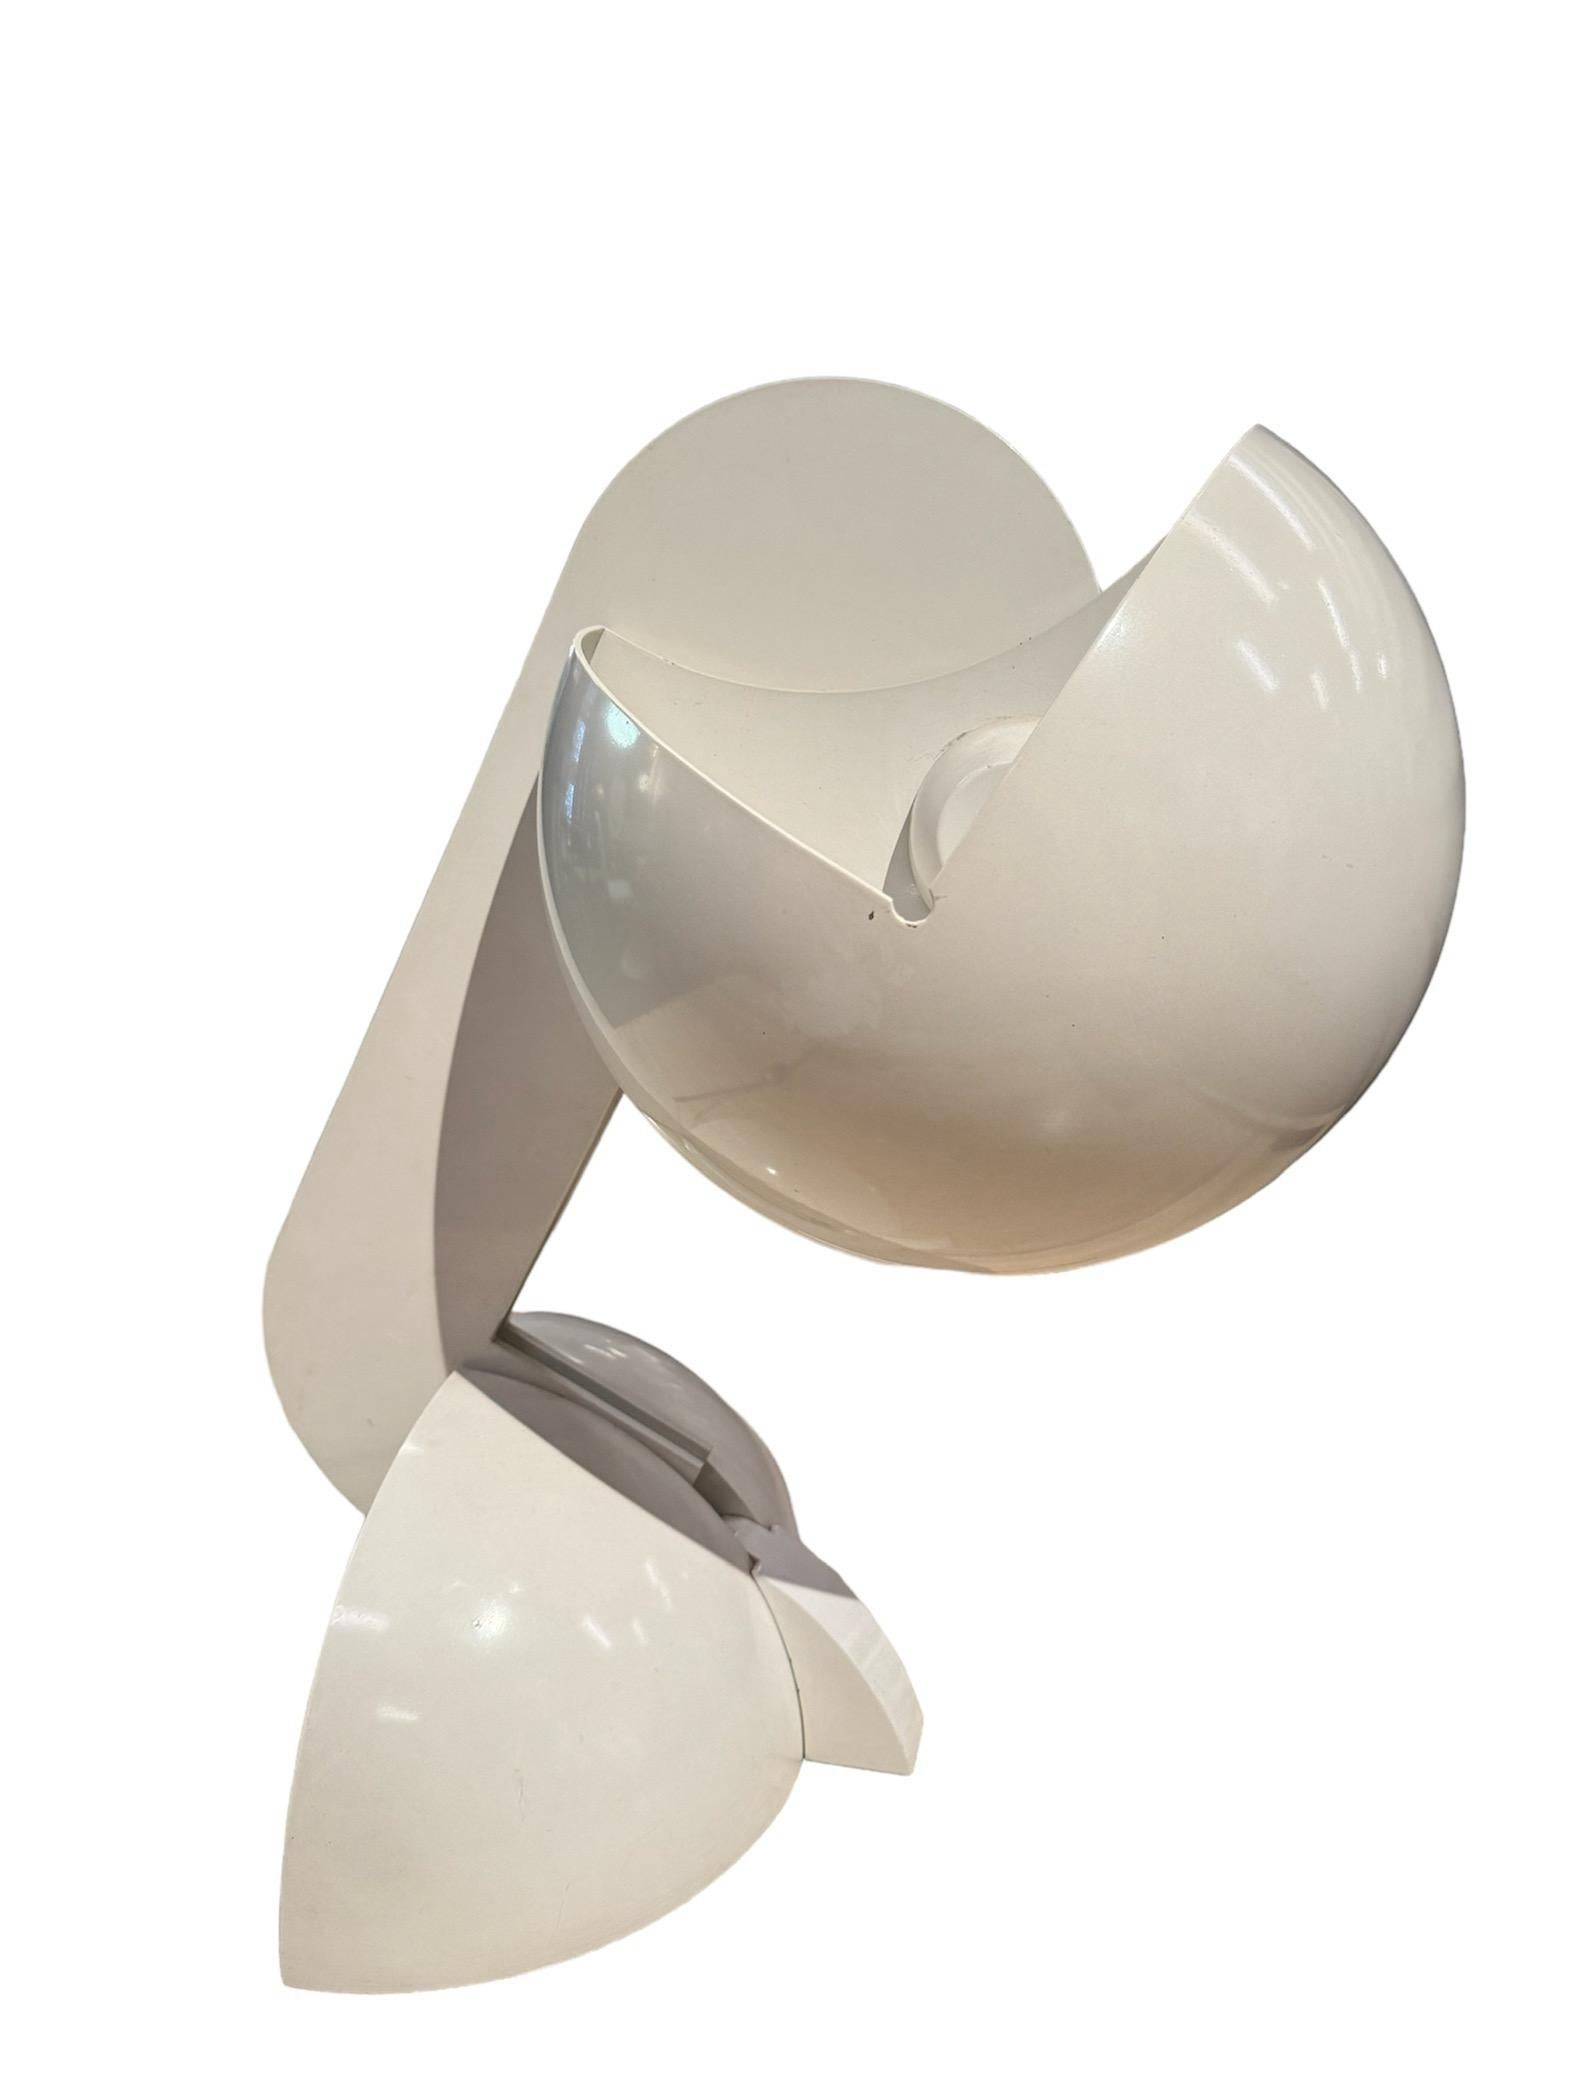 Gae Aulenti early edition of the Ruspa table lamp In Good Condition For Sale In Bruxelles, BE